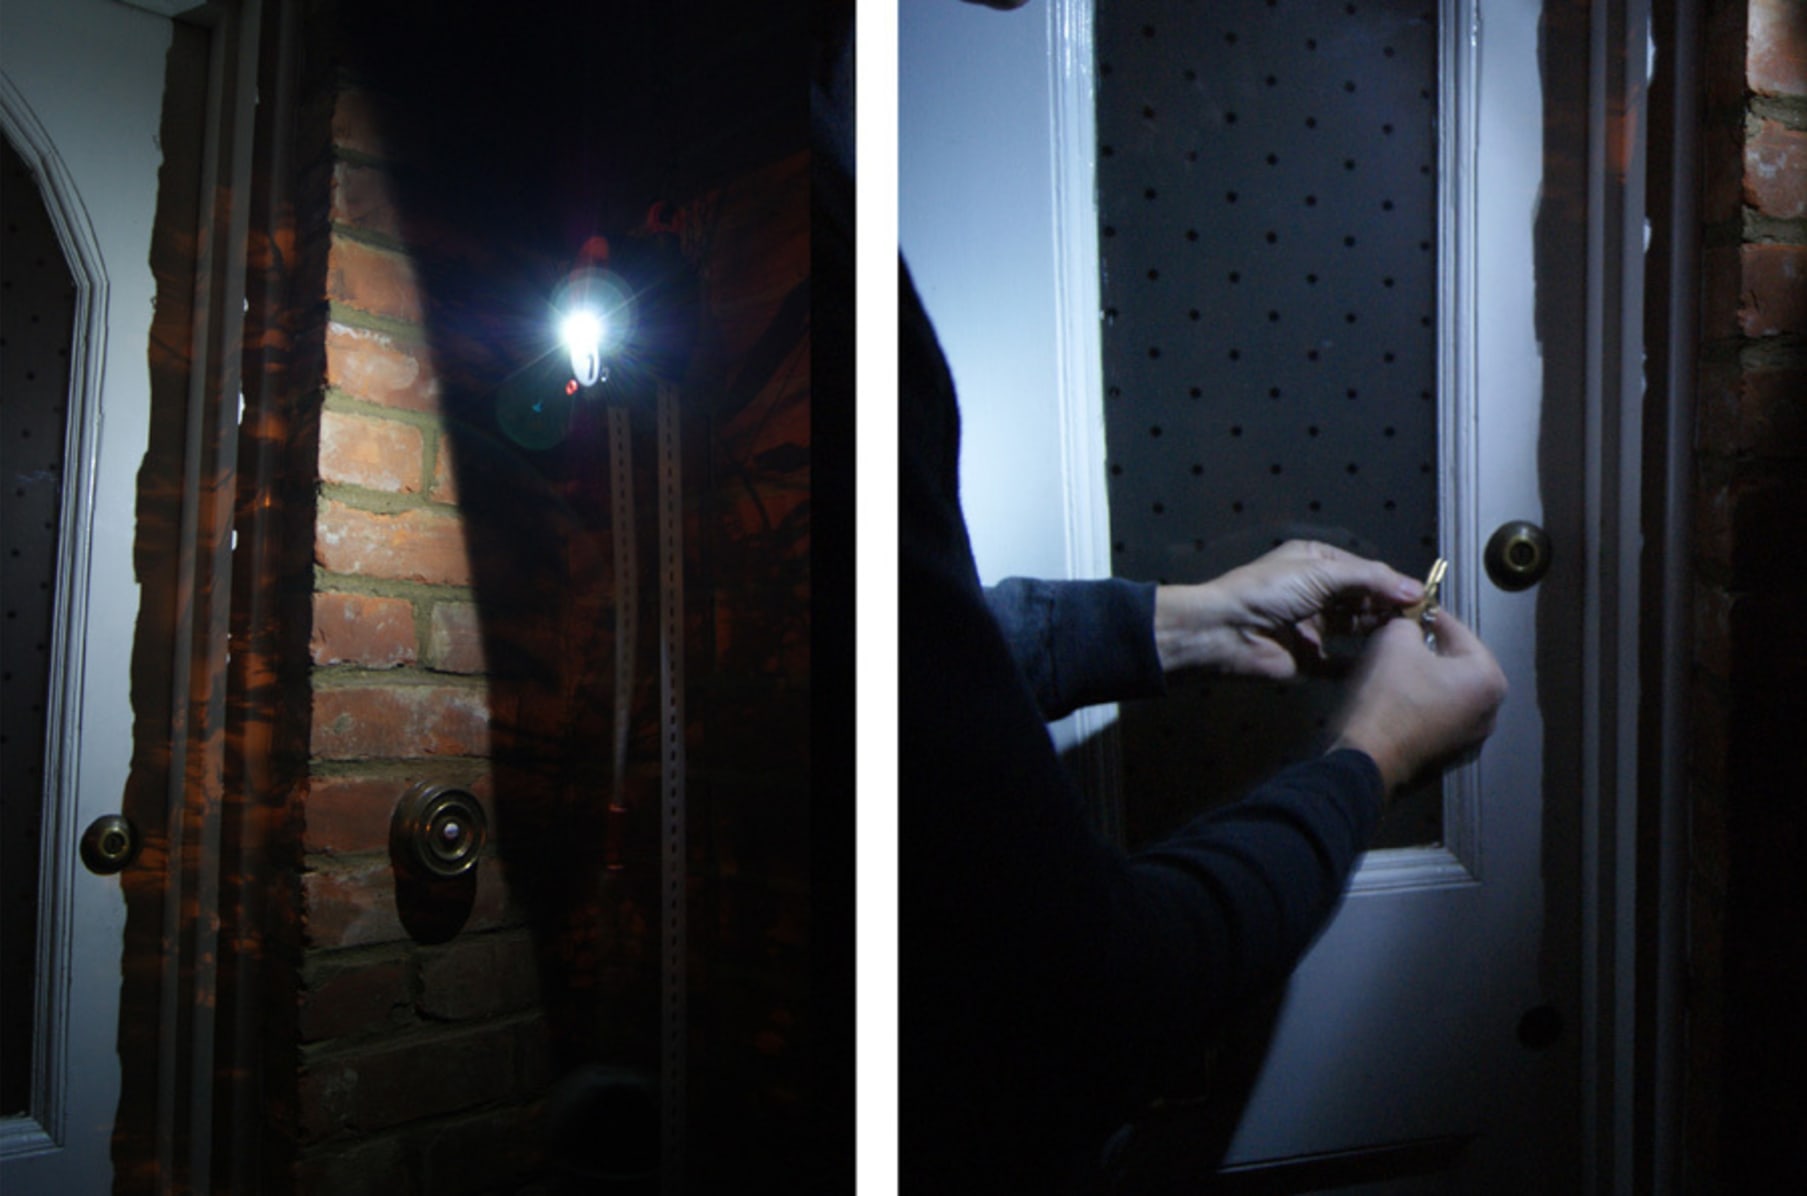 Gravity-Powered LED Lights Are Lighting Up Third-World Countries - Chipkin  Automation Systems